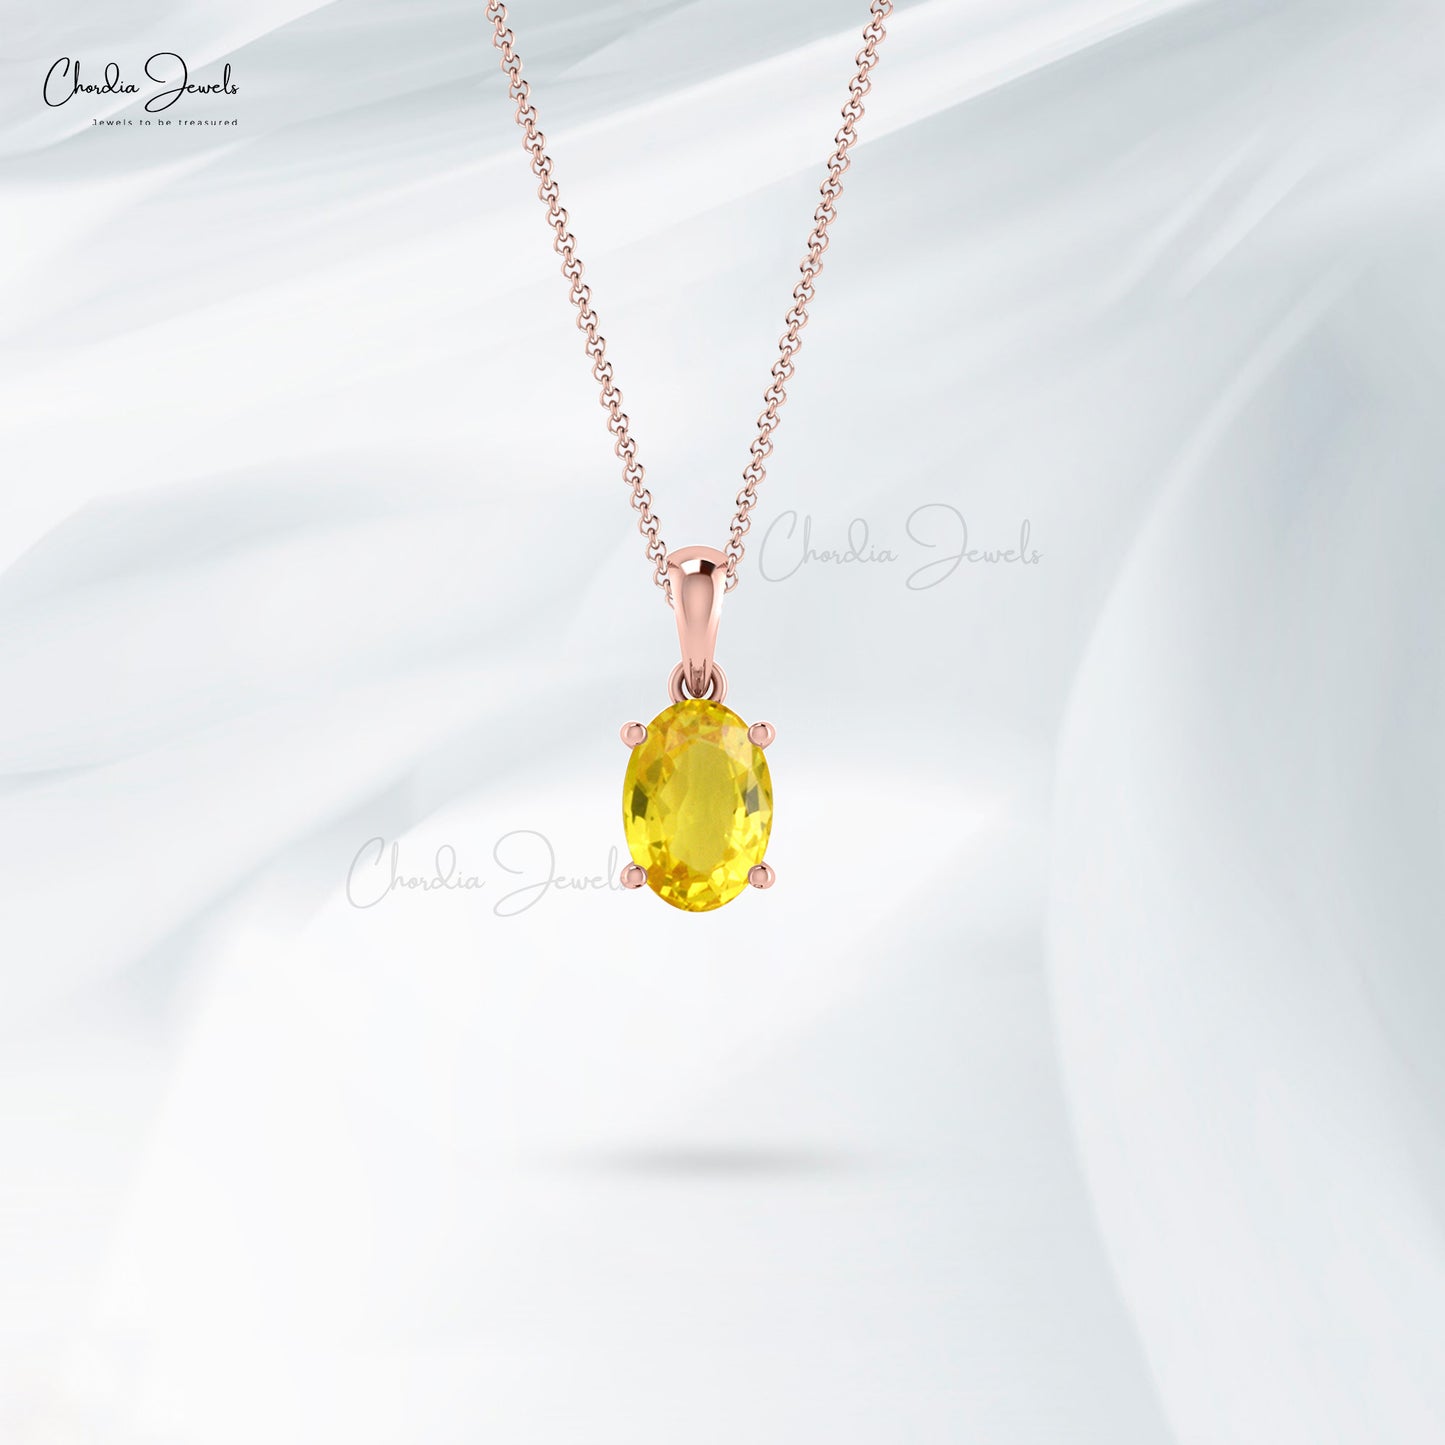 Real 14k Gold Natural Yellow Sapphire Solitaire Pendant 0.8 Ct Oval Cut Gemstone Minimal Pendant Light Weight Jewelry For Women